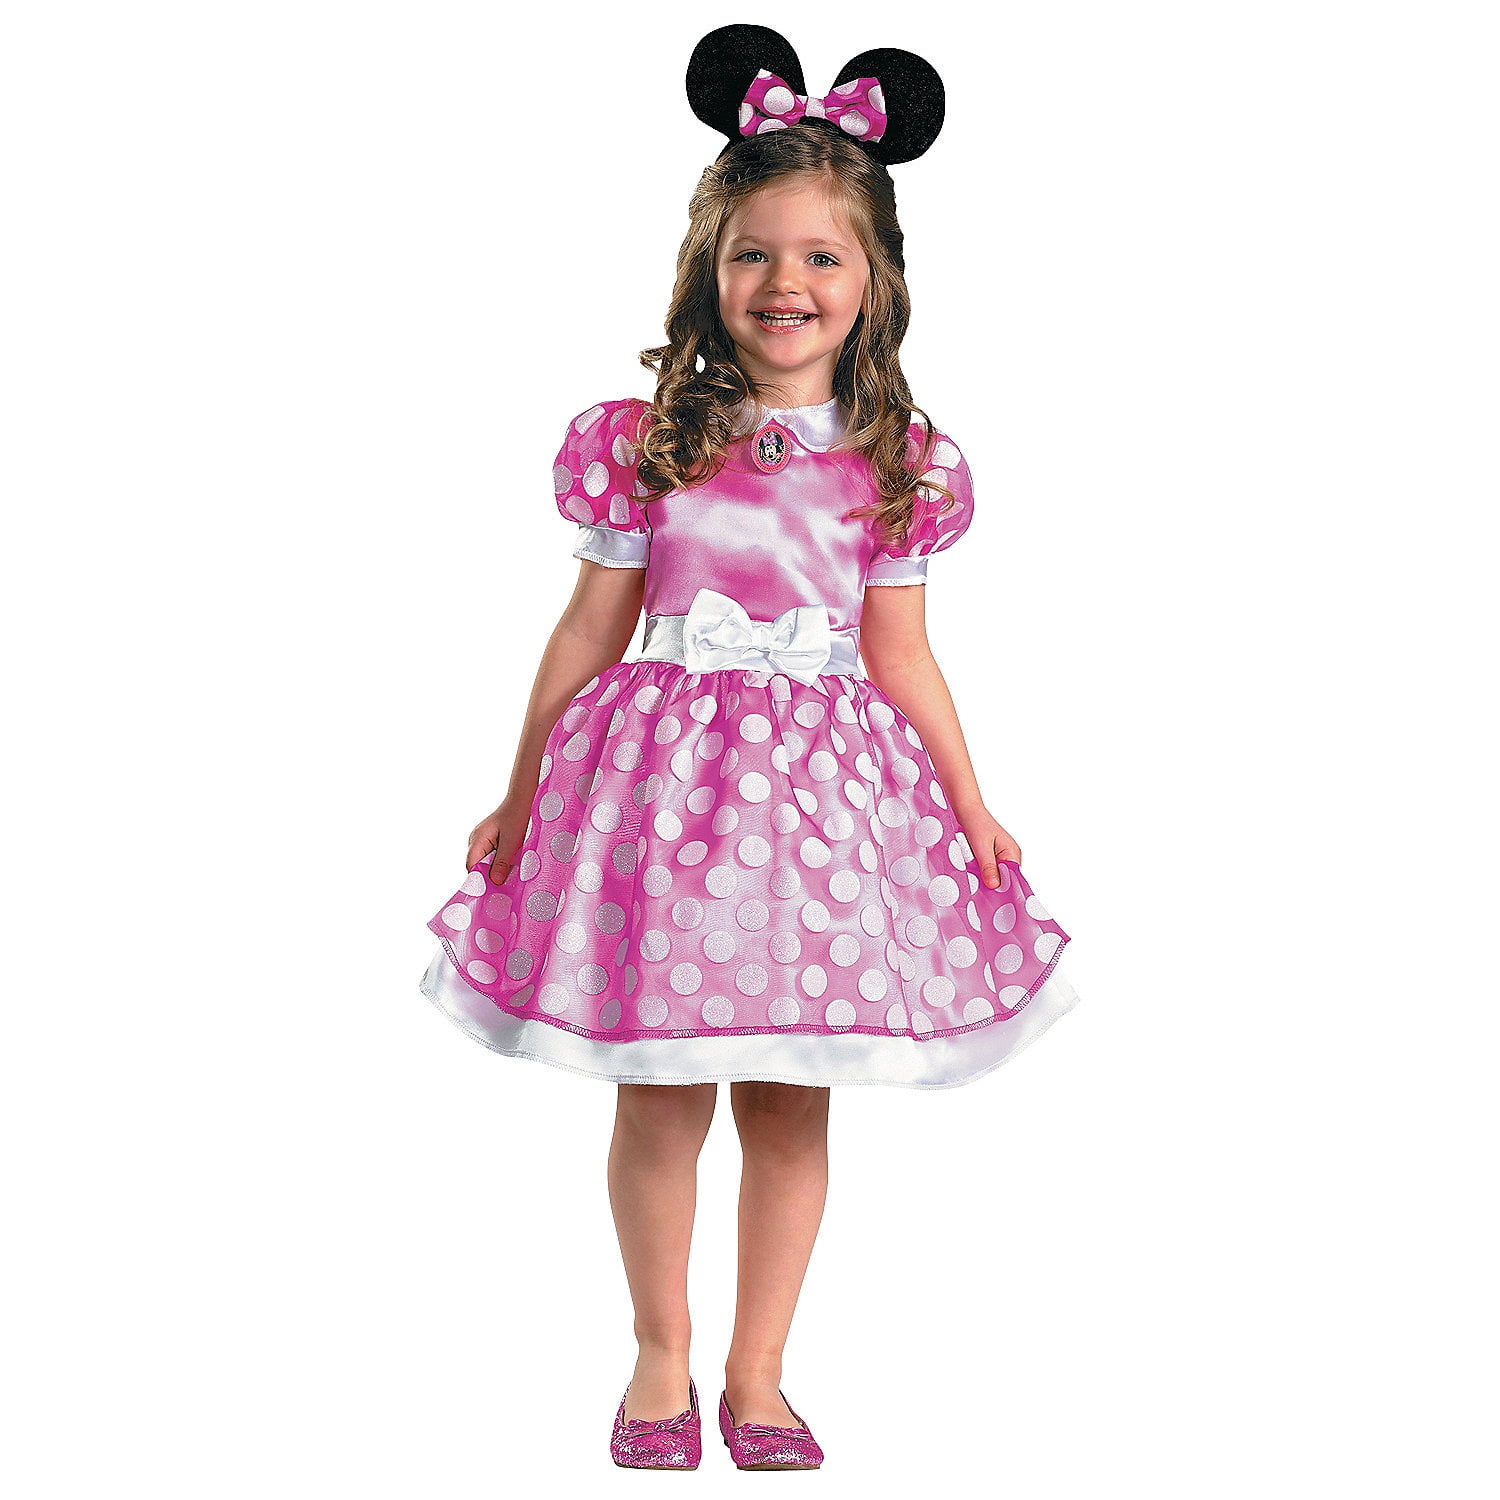 Pink minnie mouse classic toddler halloween costume 3t-4t - Walmart.com